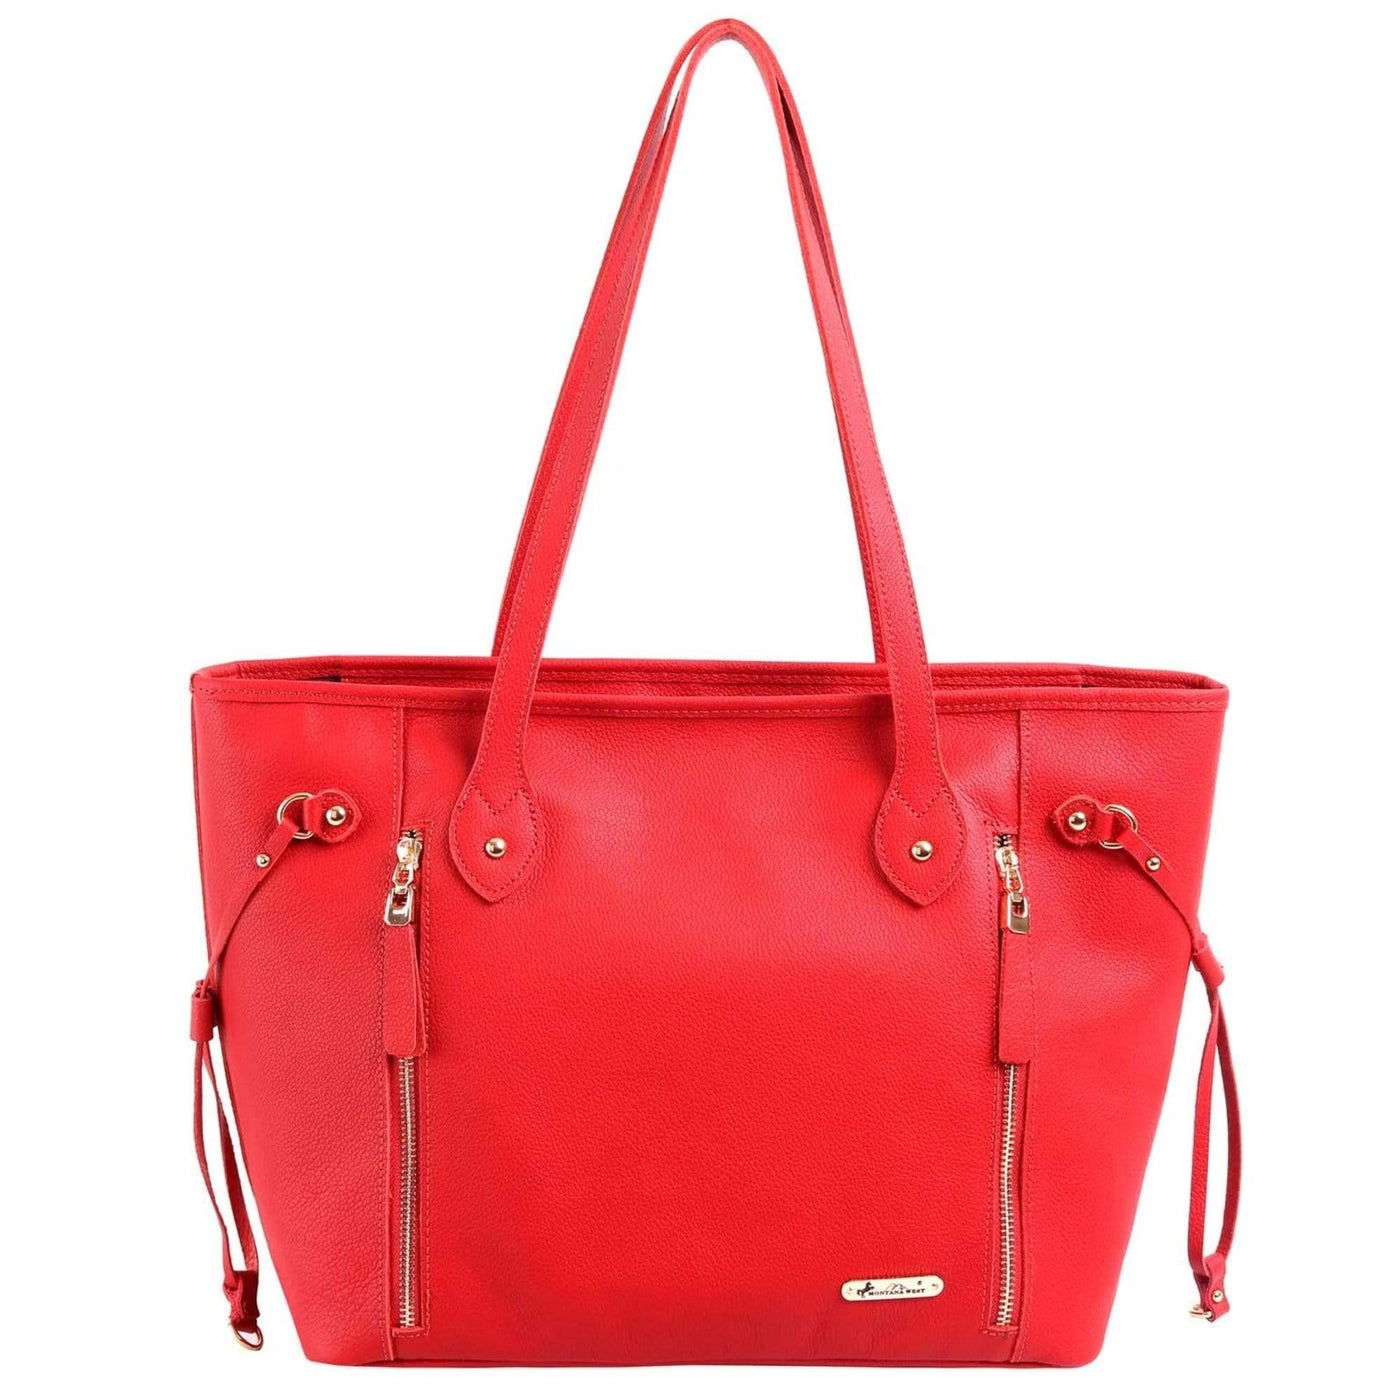 Montana West Concealed Carry Purse Bag Red Concealed Carry Leather Tote by Montana West